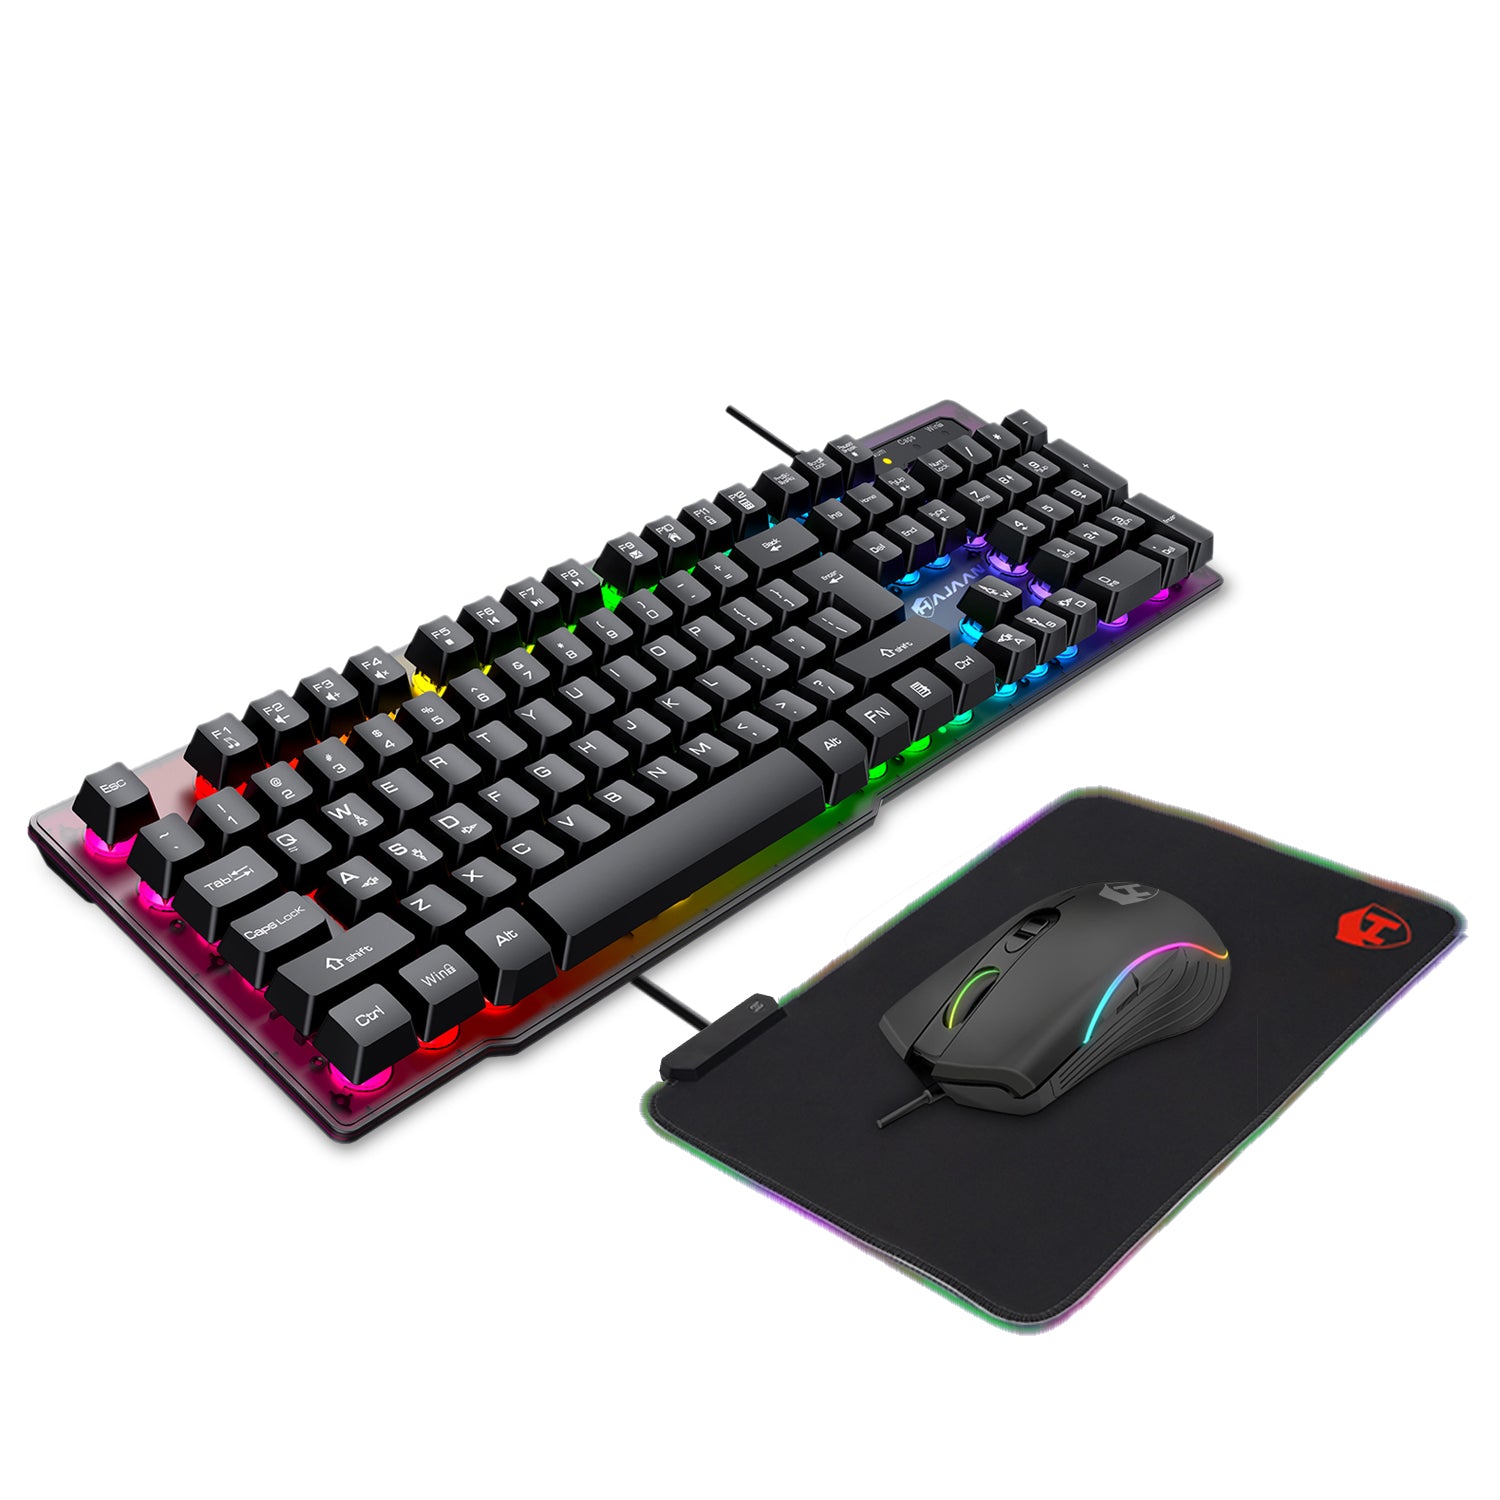 HAJAAN H410-G Wired RGB Gaming Keyboard and Mouse, Gaming Mouse Pad Combo with Multimedia and Anti-Ghosting Capability Keys- Gamer Bundle for Windows PC – (Black)